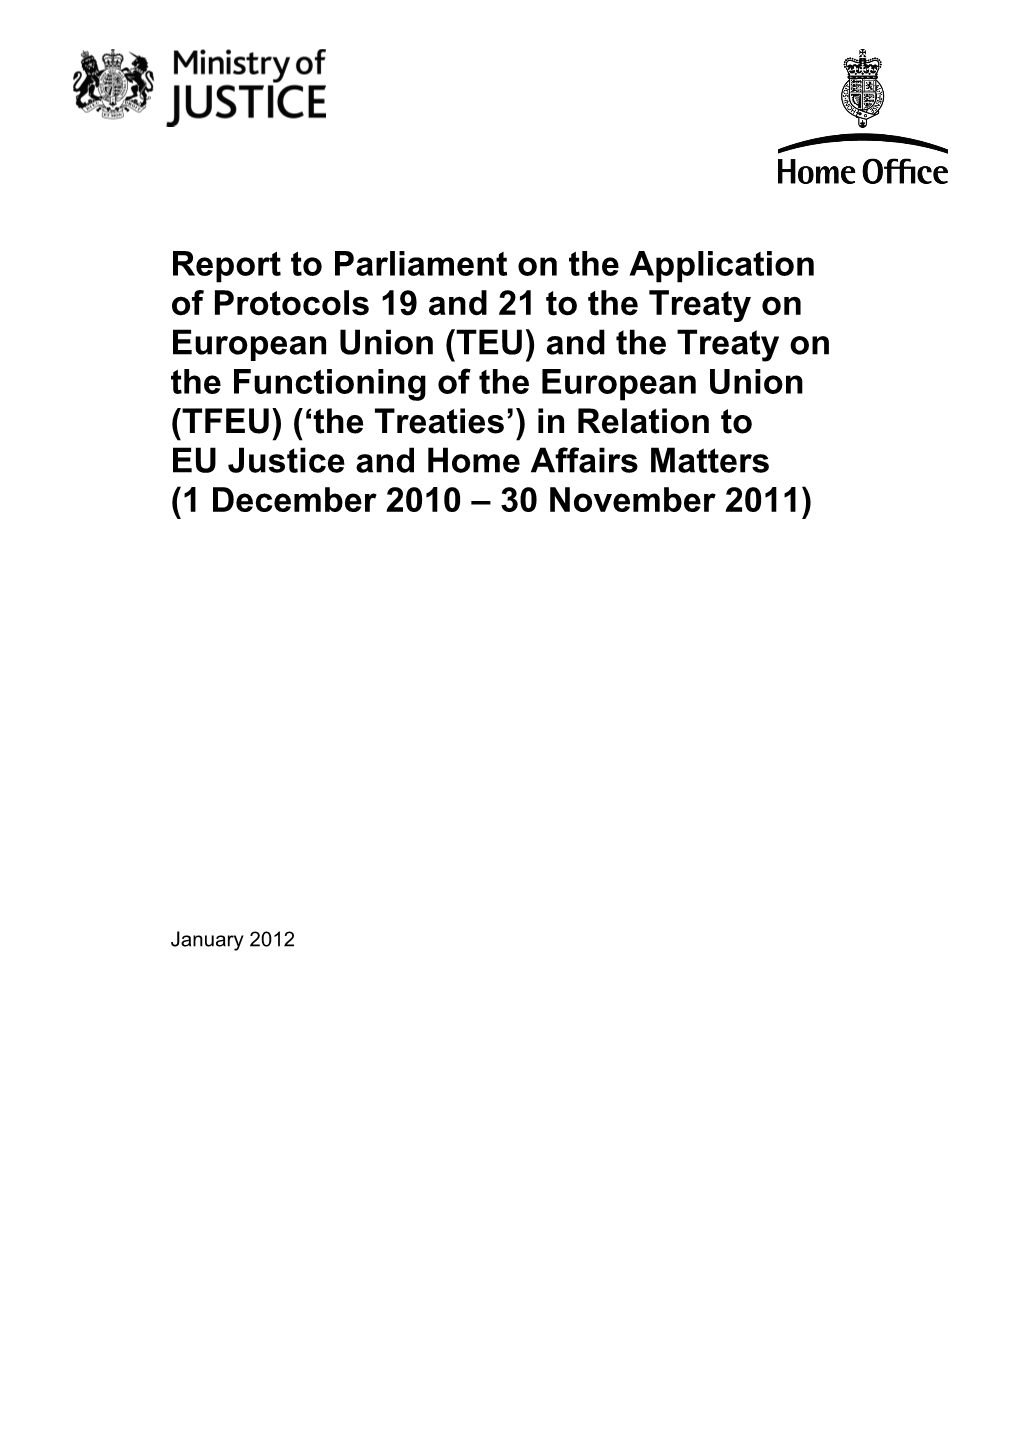 Report to Parliament on the Application of Protocols 19 and 21